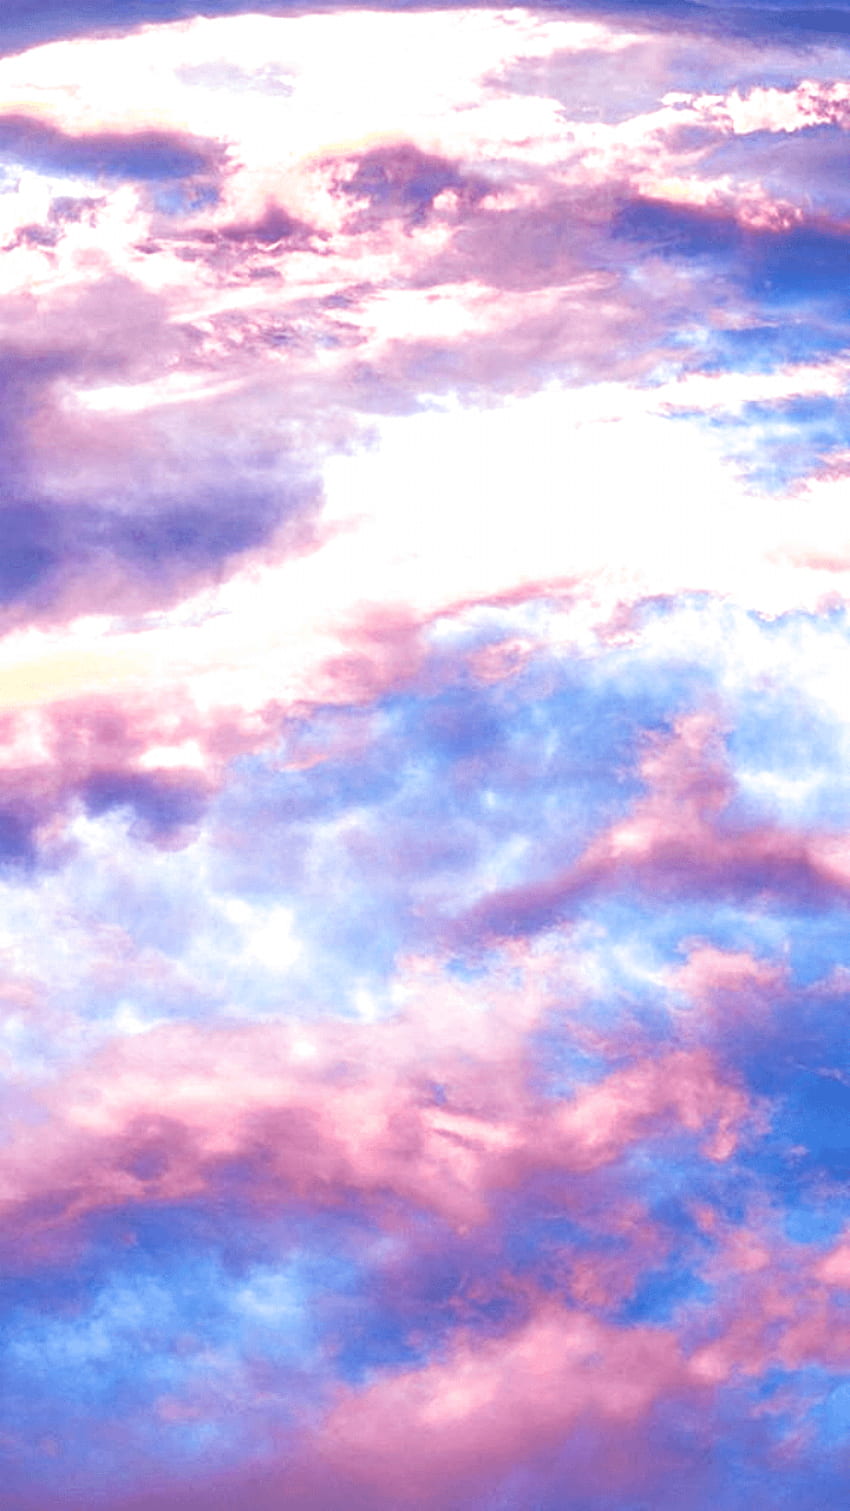 Cloud Aesthetic For iPhone: Beautiful Tumblr inspired blue and pink ...